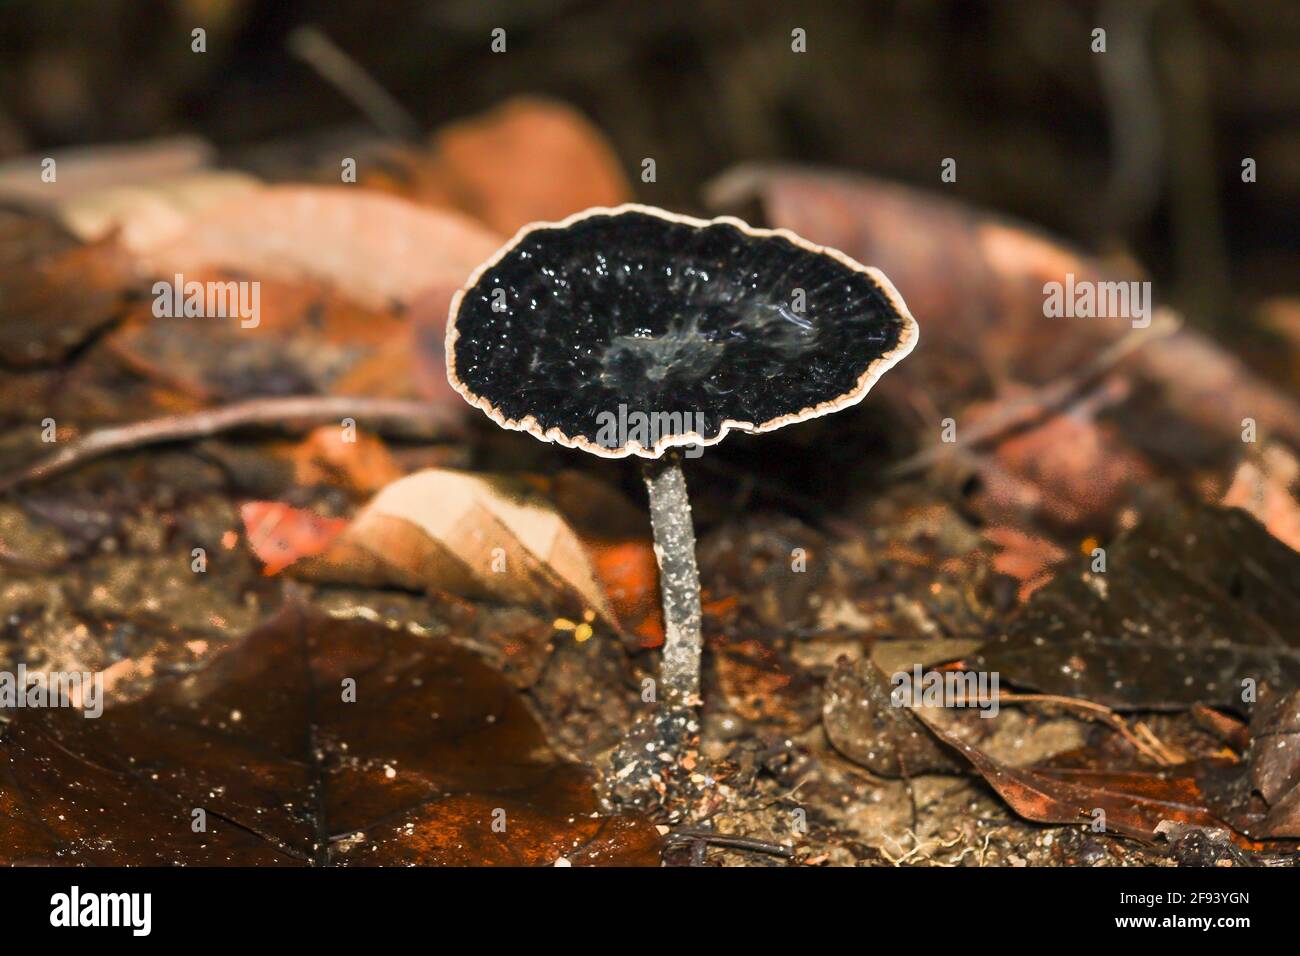 Single black fungi with a white ring growing in a tropical forest Stock Photo